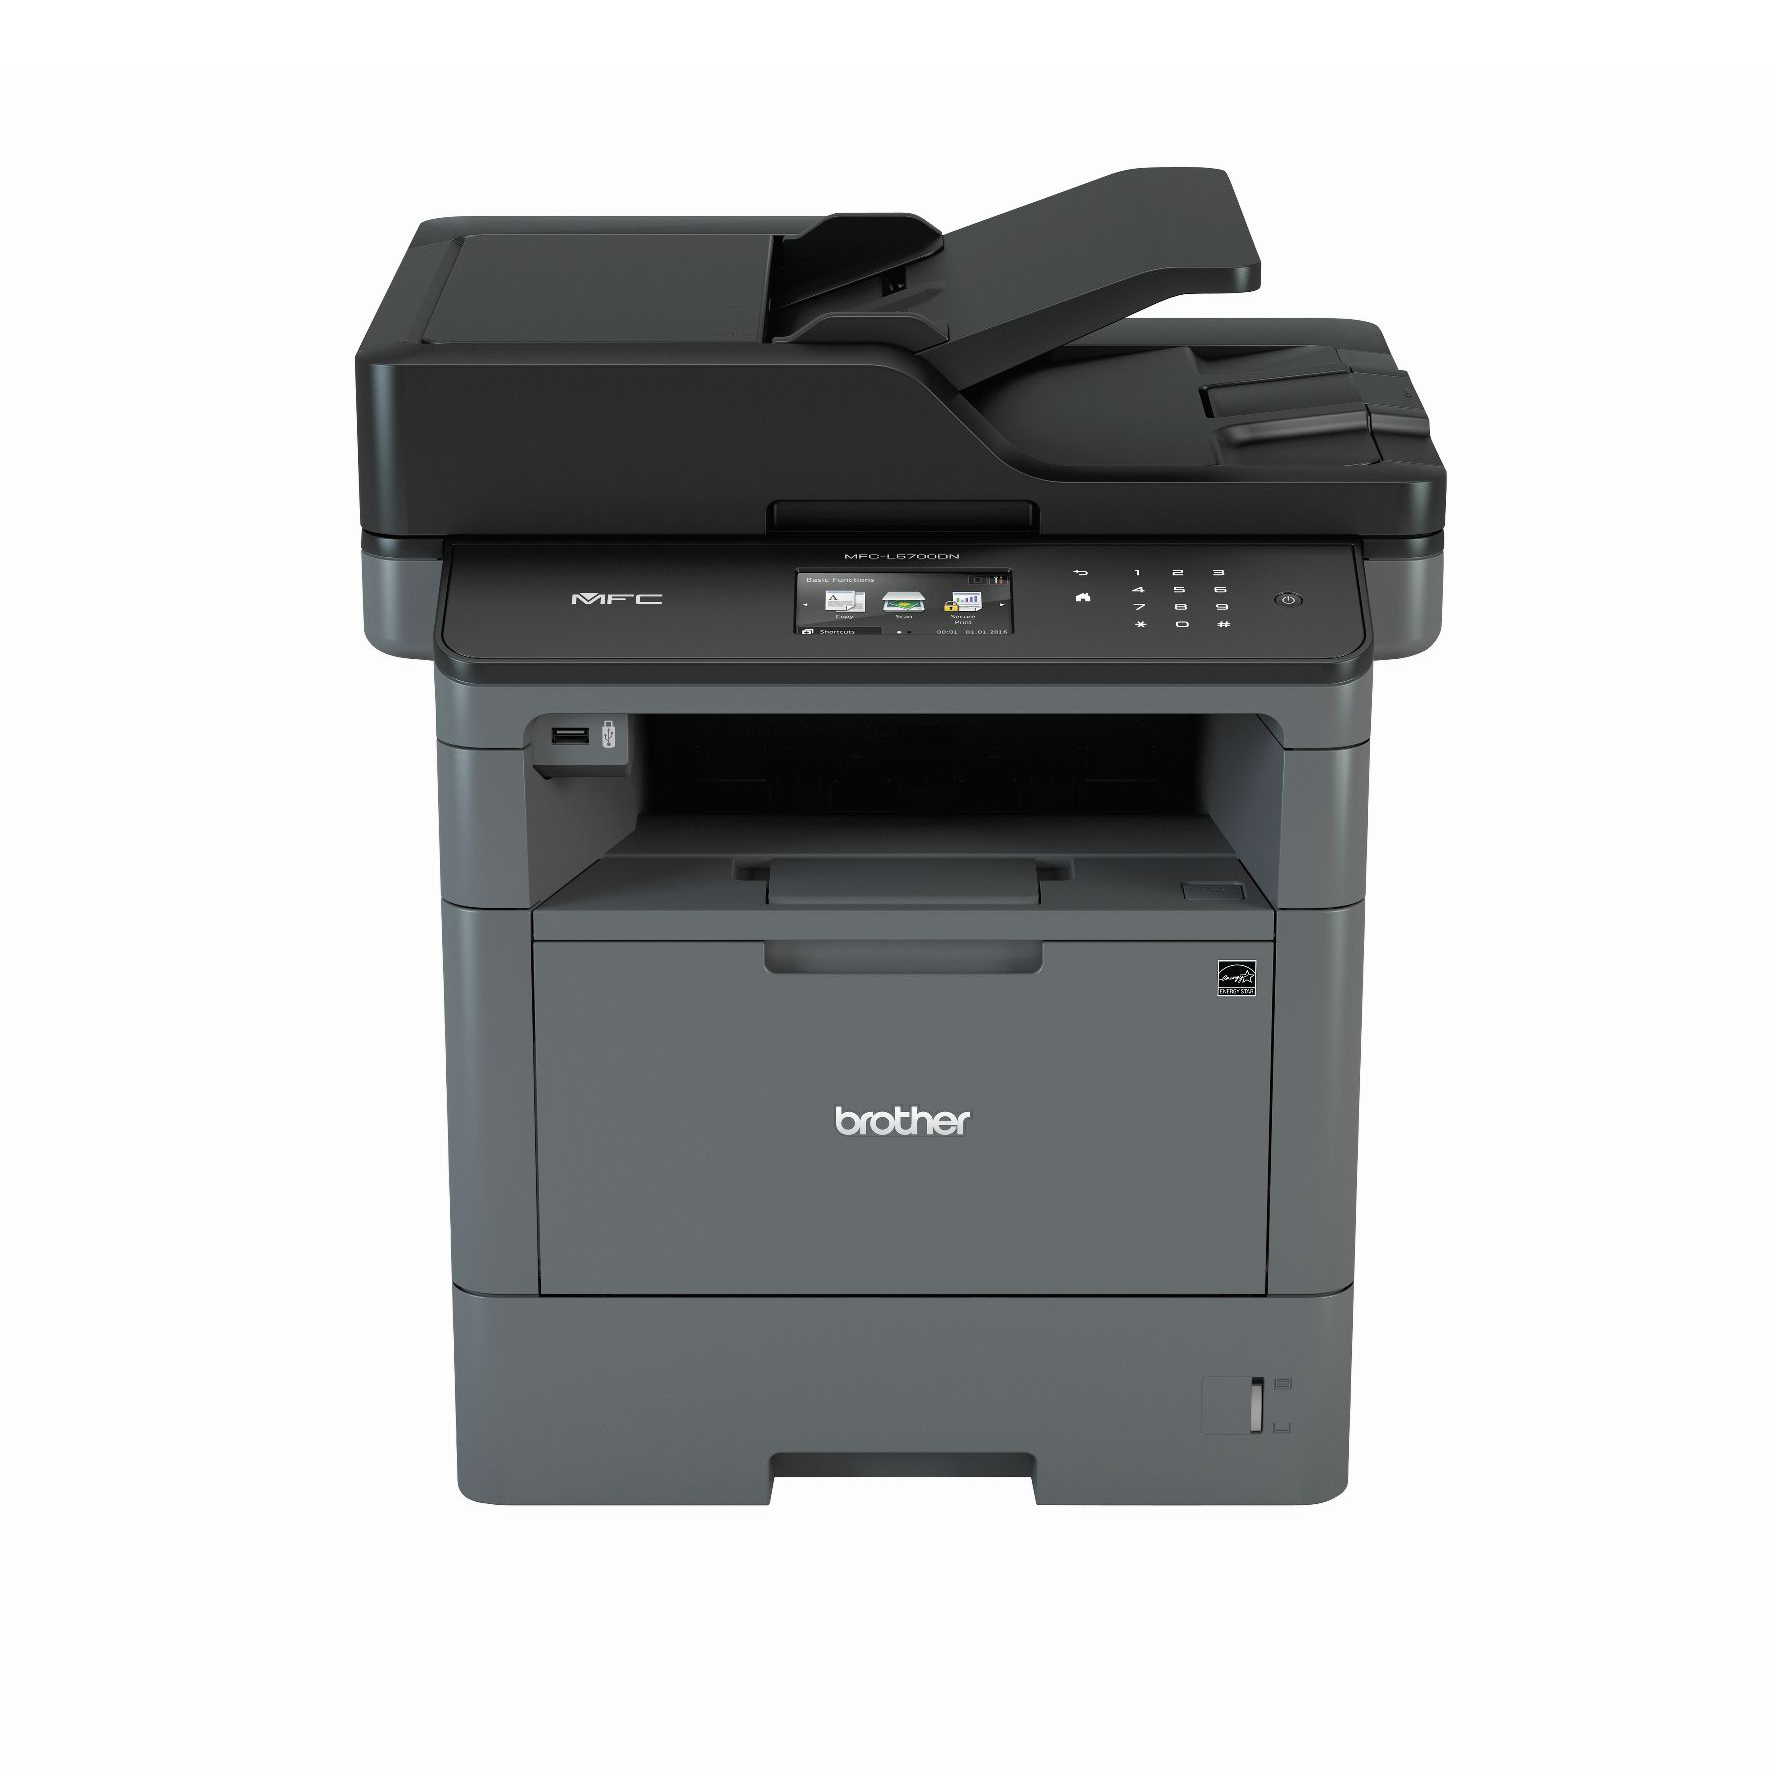 Mfc L5700dn Mfp Las Bn A4 4in1 Brother Multifunction Mono Laser Mfcl5700dnc1 4977766753876